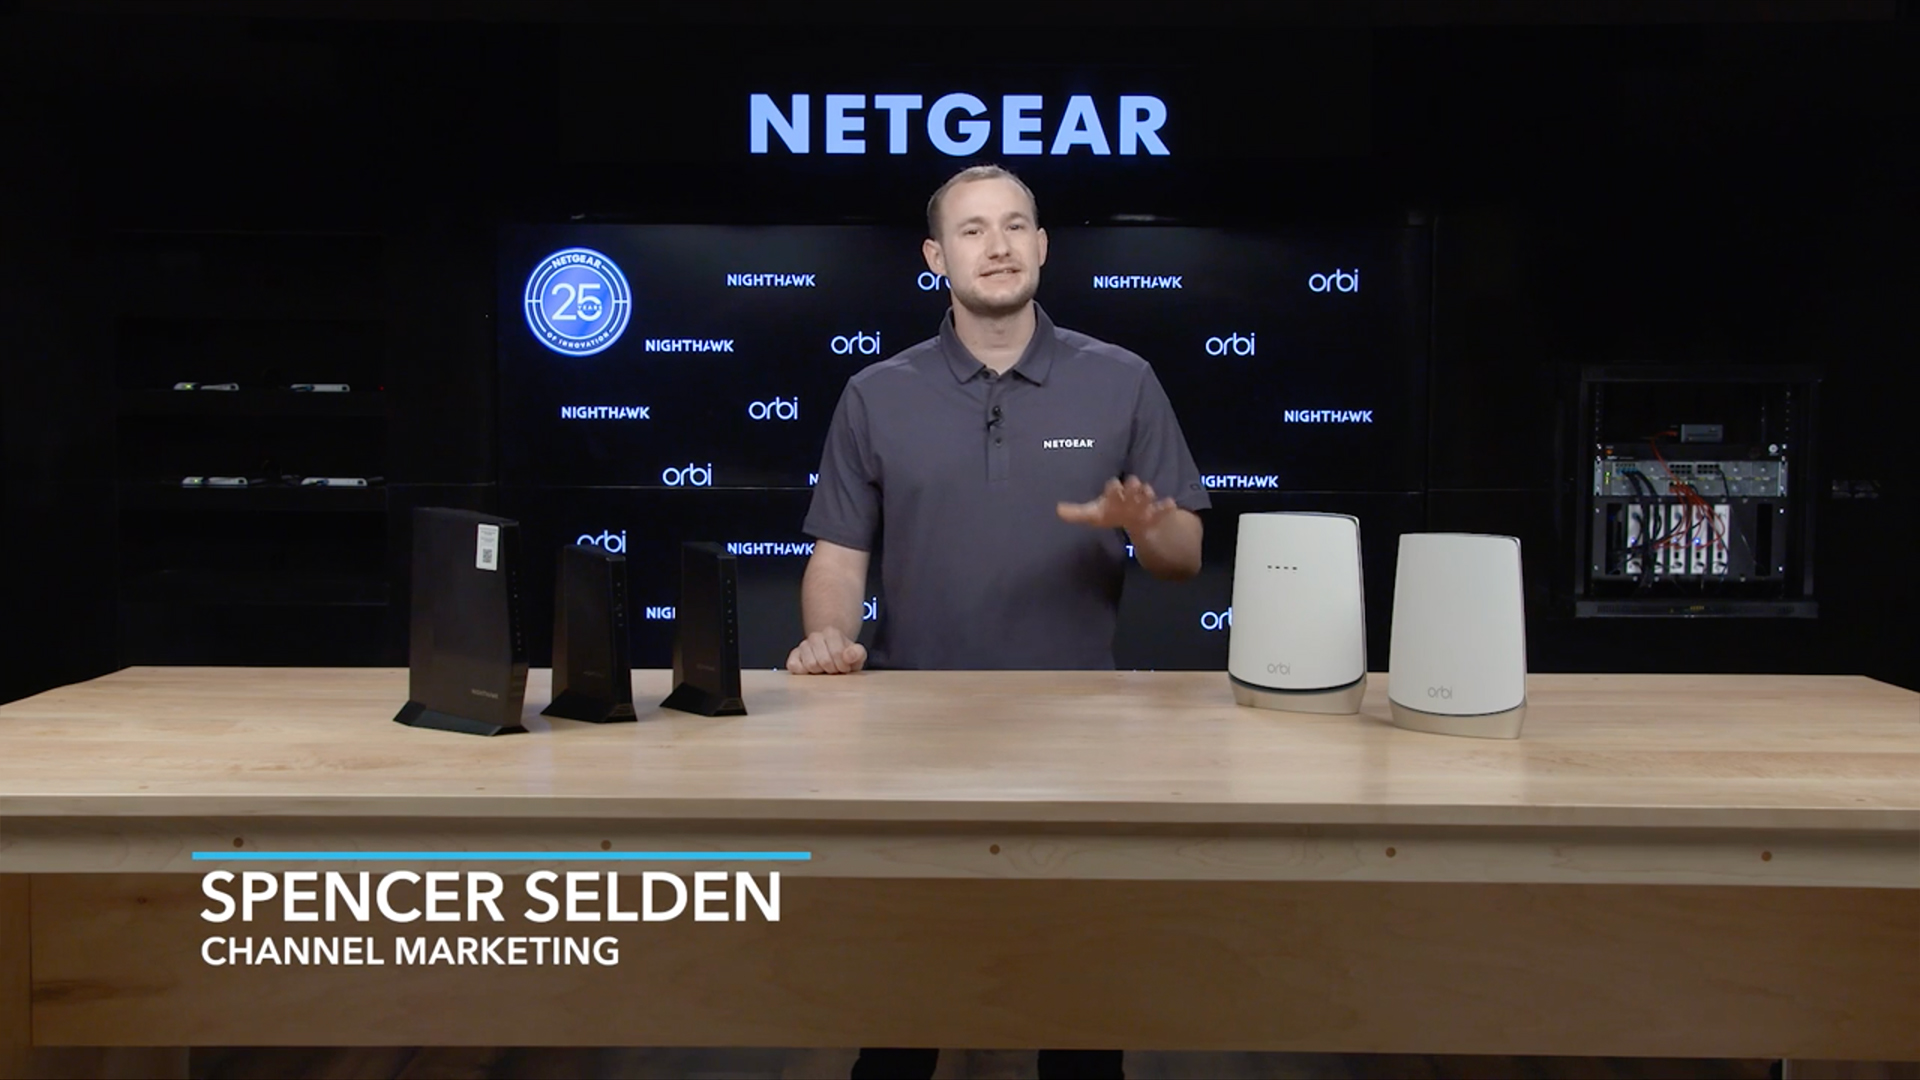 The Latest News in Cable Modems by NETGEAR